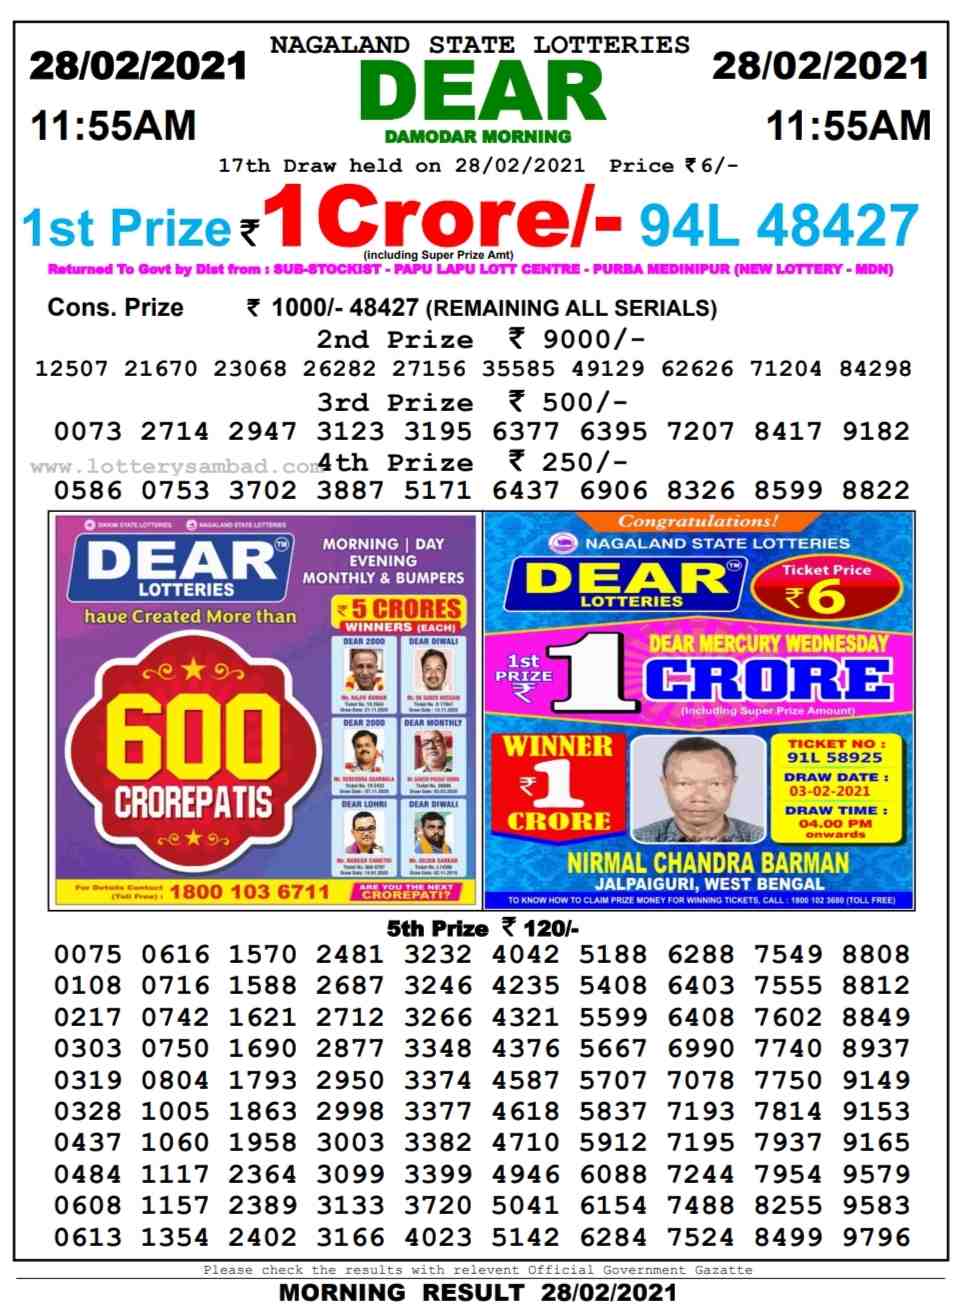 DEAR DAILY 1155AM LOTTERY RESULT 28.2.2021